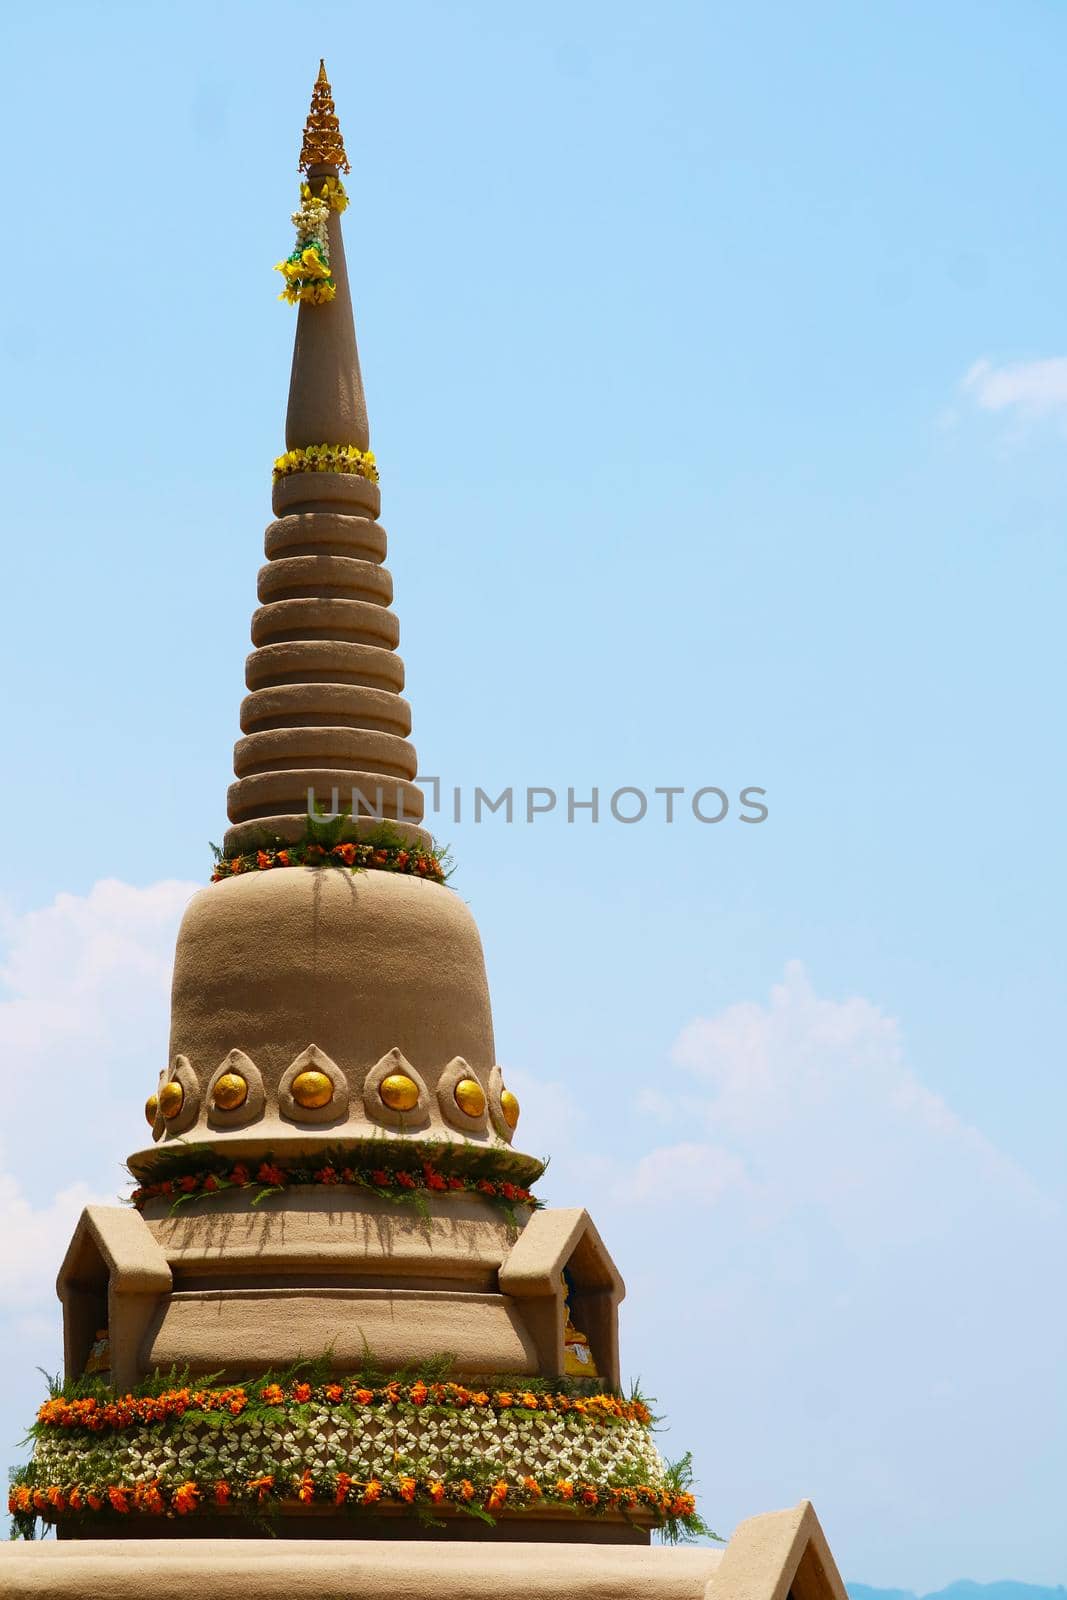 top of sand pagoda was carefully built, and beautifully decorated in Songkran festival by Darkfox